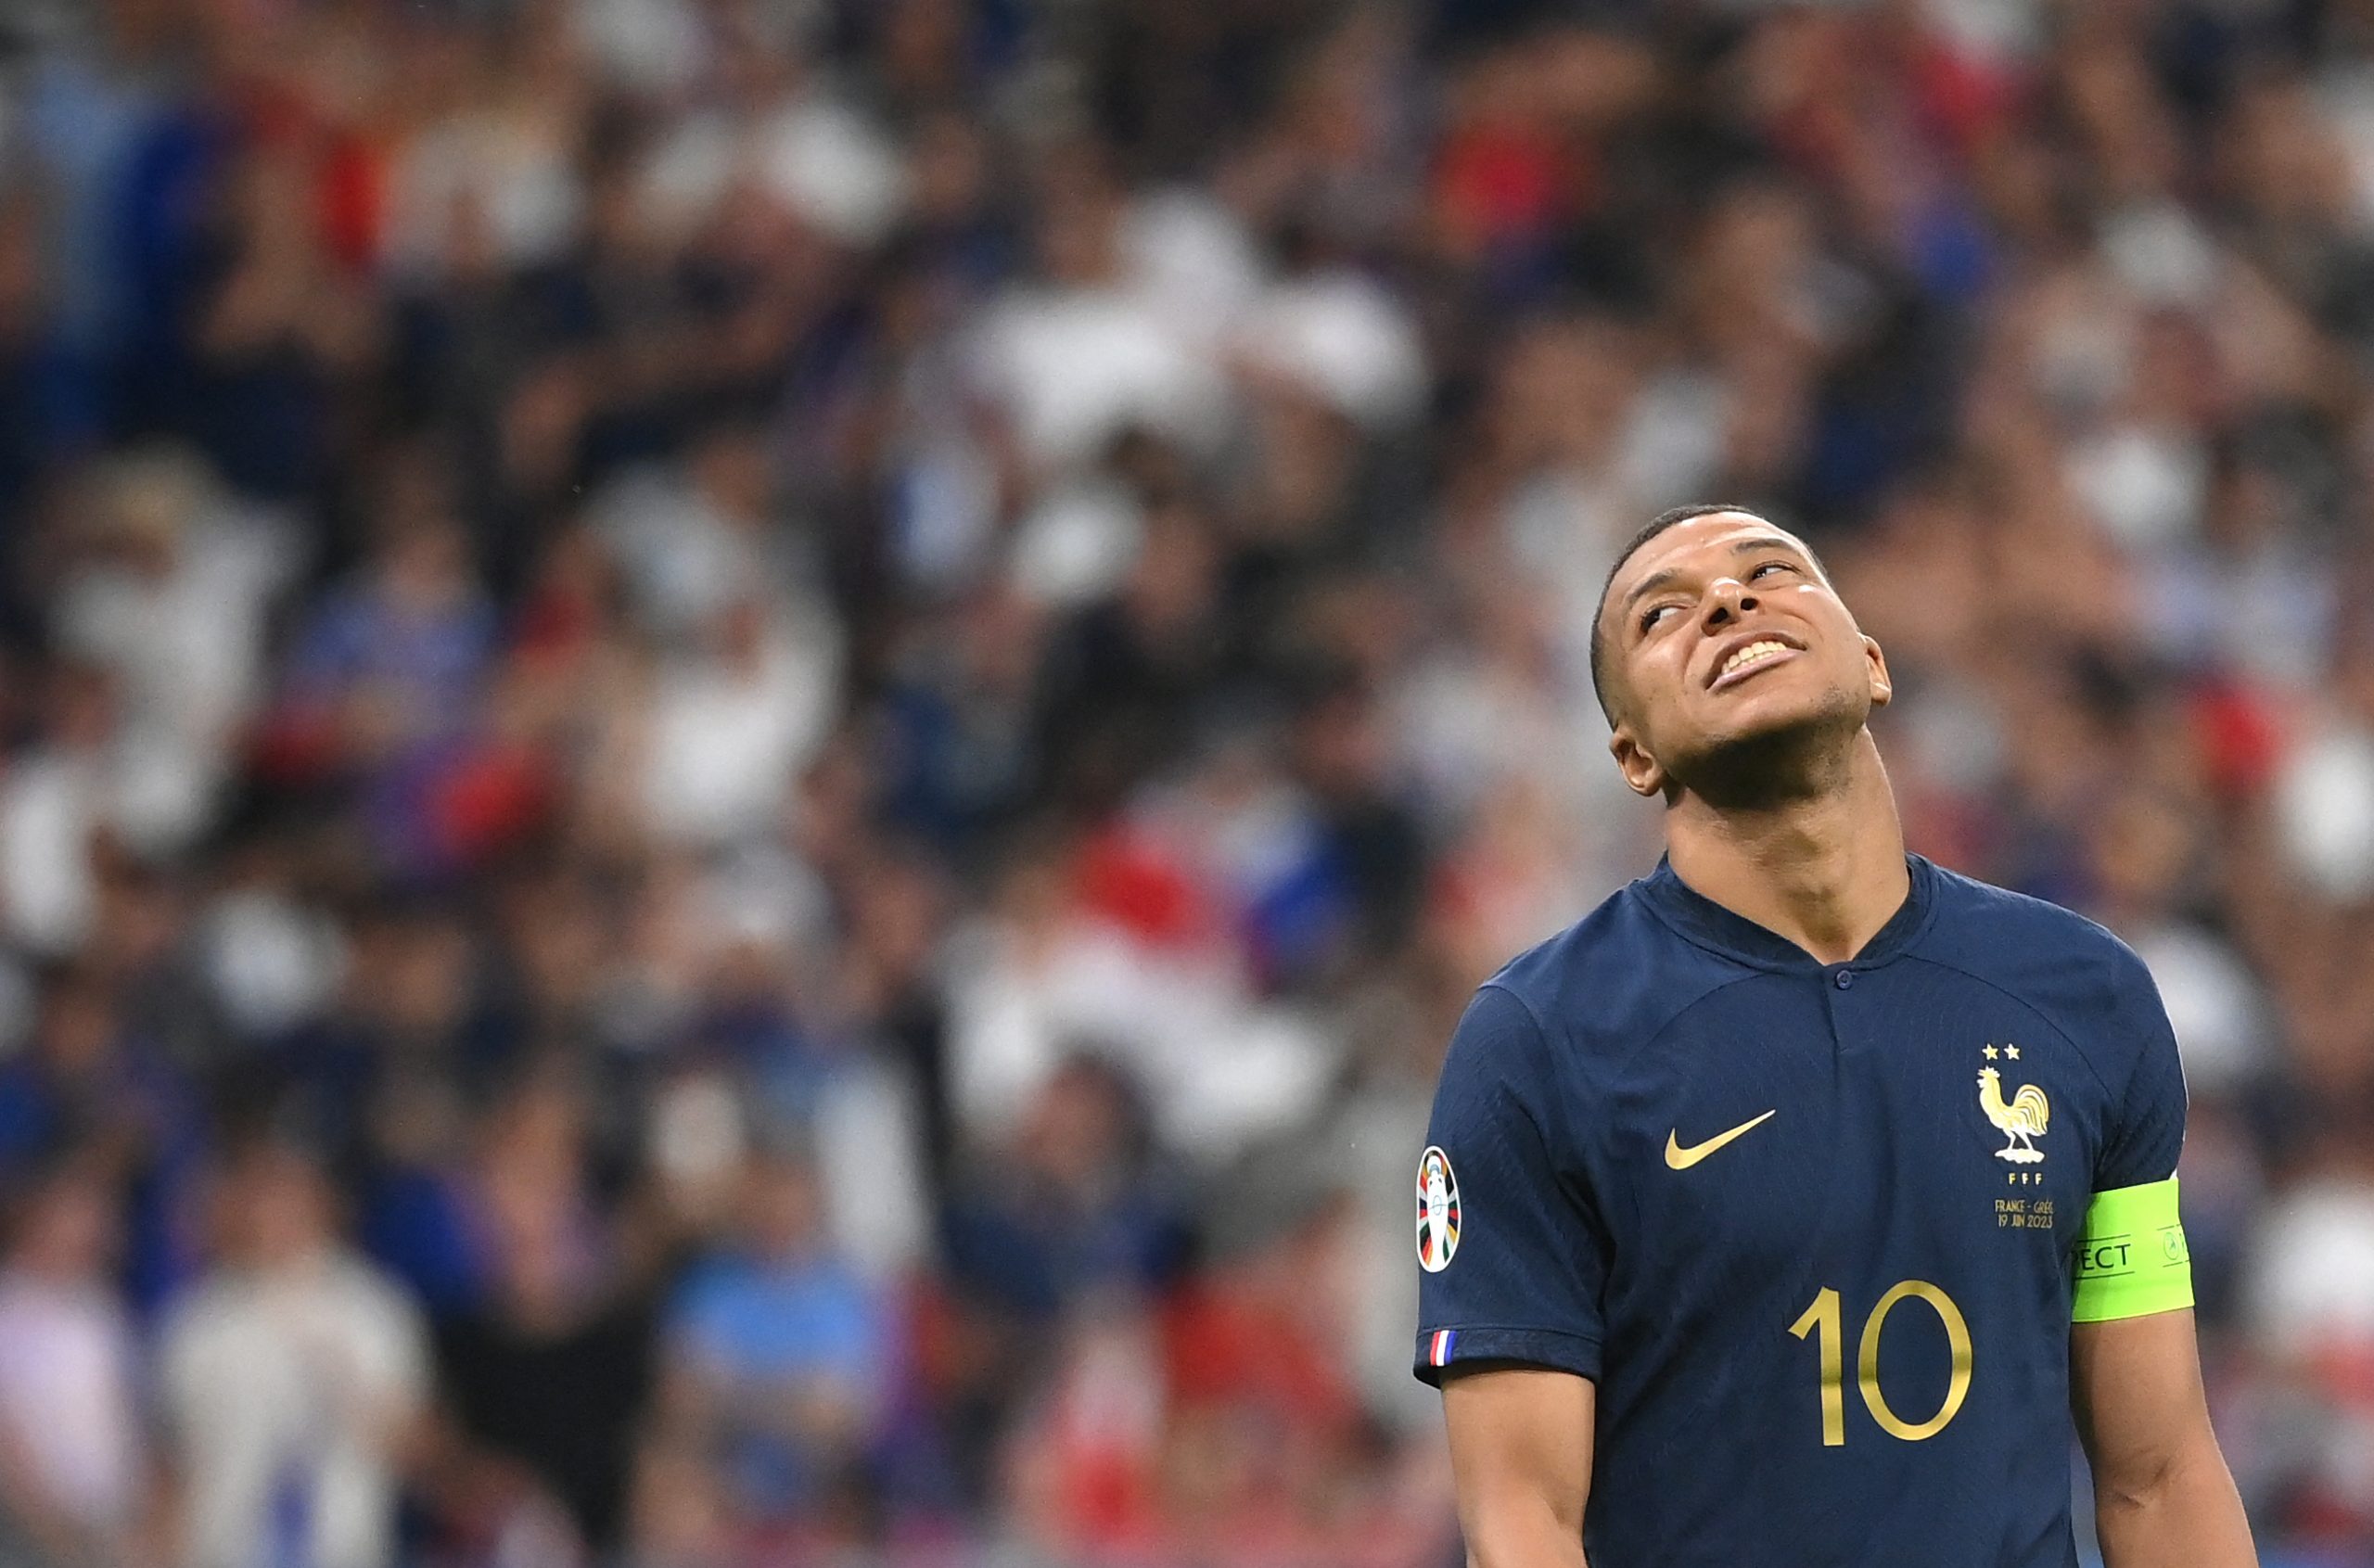 France's forward Kylian Mbappe reacts during the UEFA Euro 2024 group B qualification football match between France and Greece at the Stade de France in Saint-Denis, in the northern outskirts of Paris, on June 19, 2023. (Photo by FRANCK FIFE / AFP) (Photo by FRANCK FIFE/AFP via Getty Images)